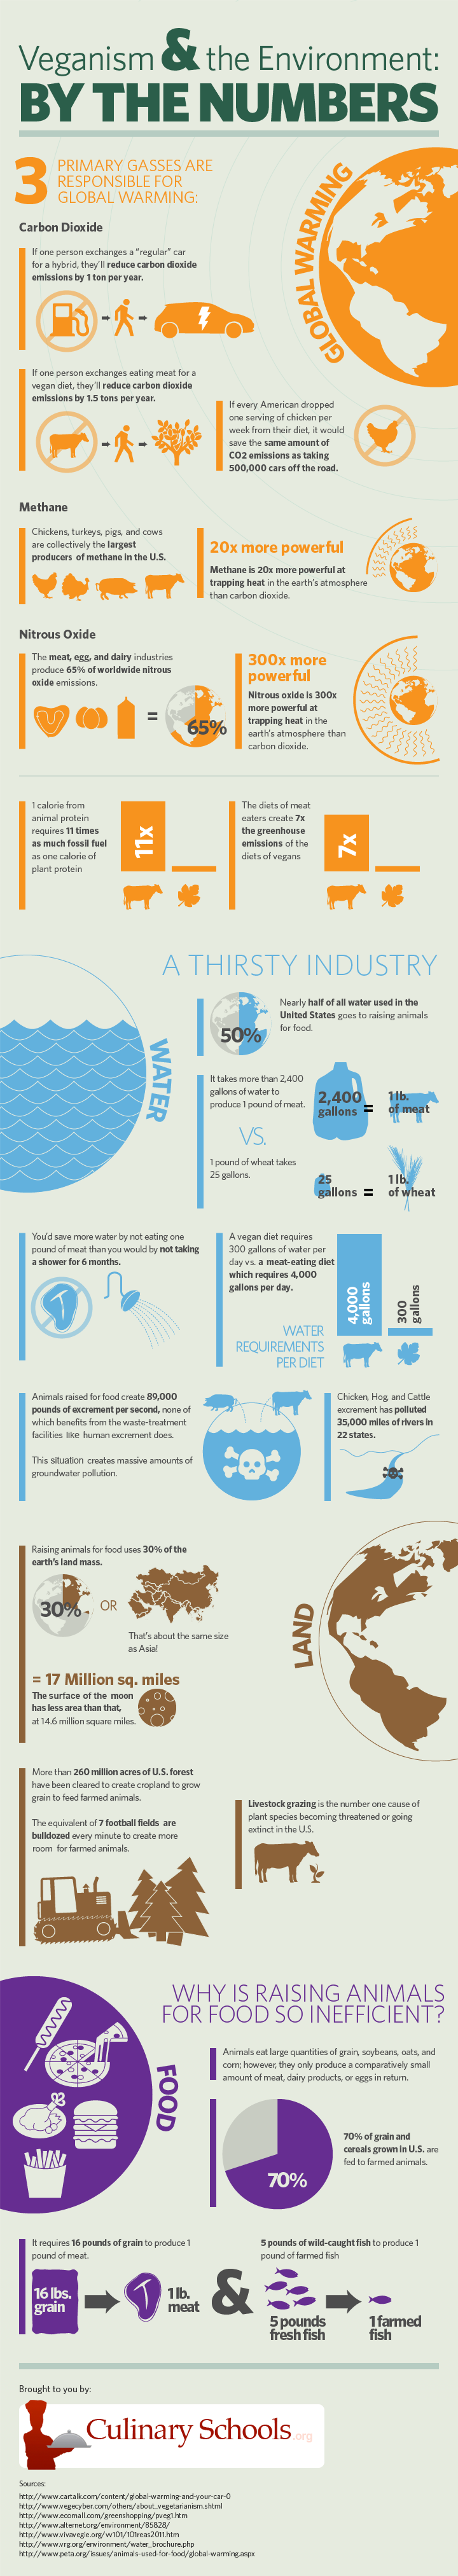 Veganism by the numbers.